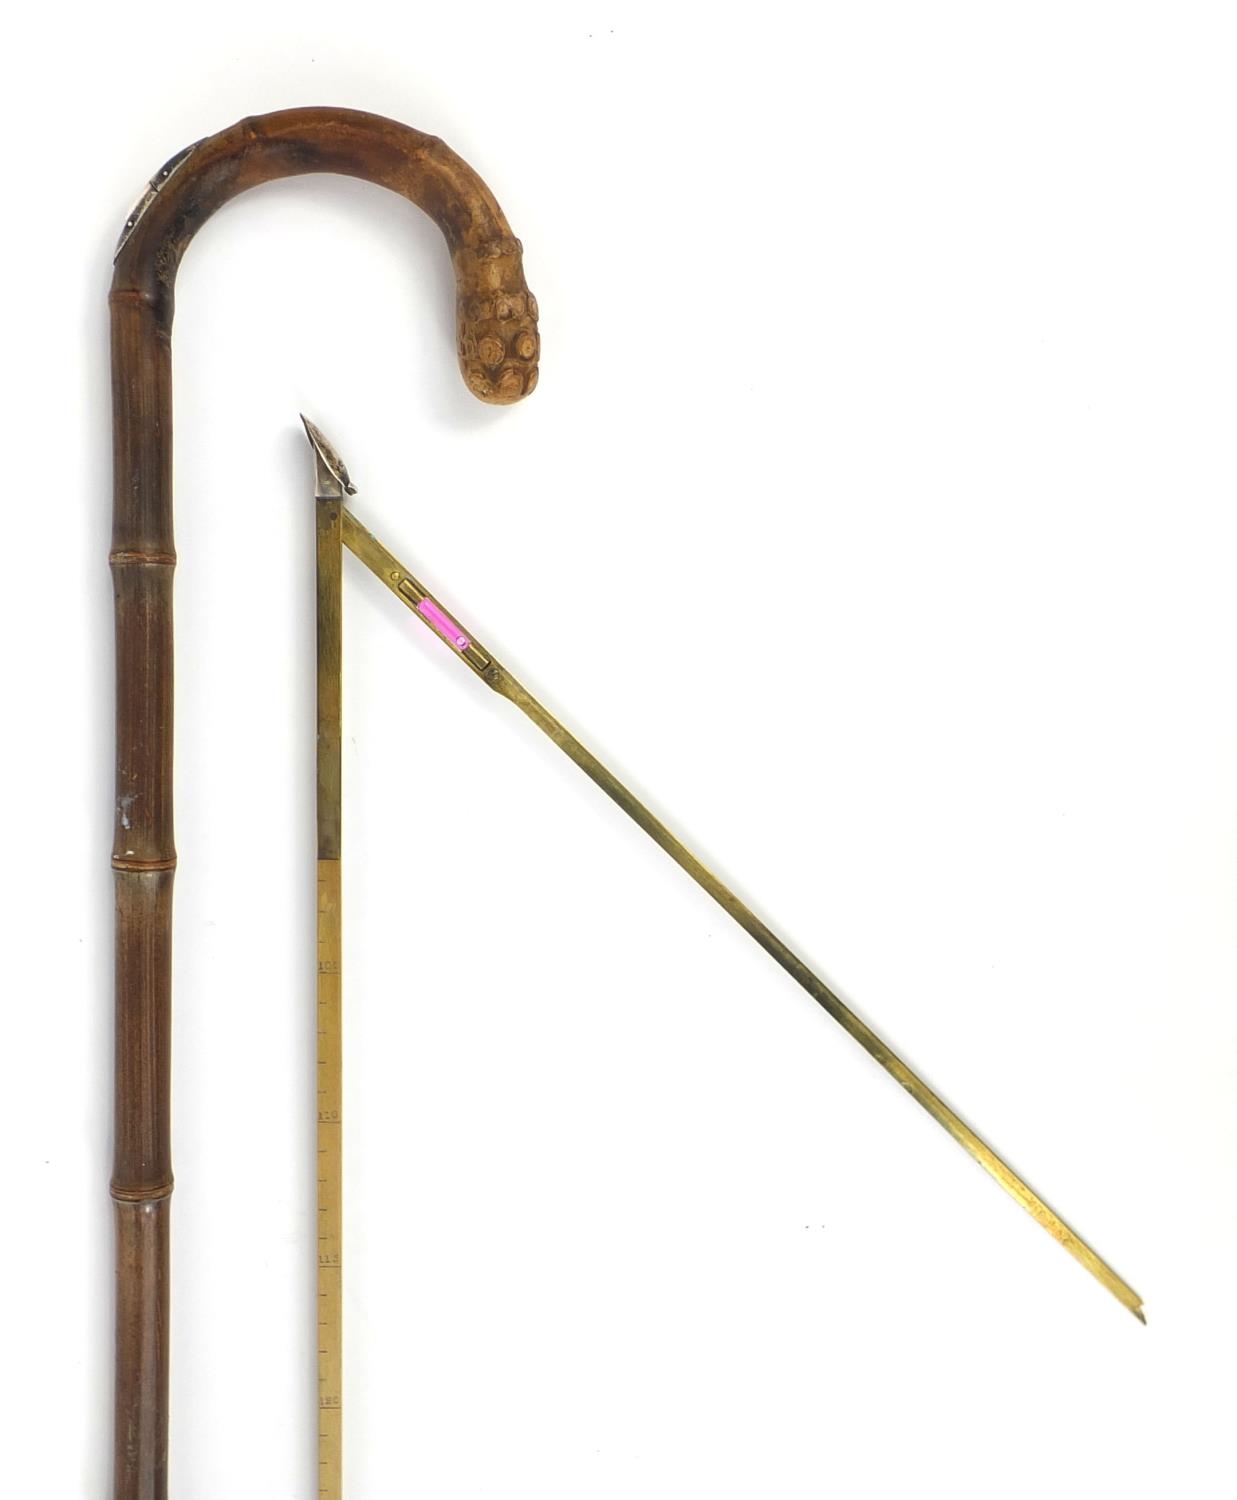 Images for 1462993. A BRASS MOUNTED HORSE MEASURING STICK. - Auctionet